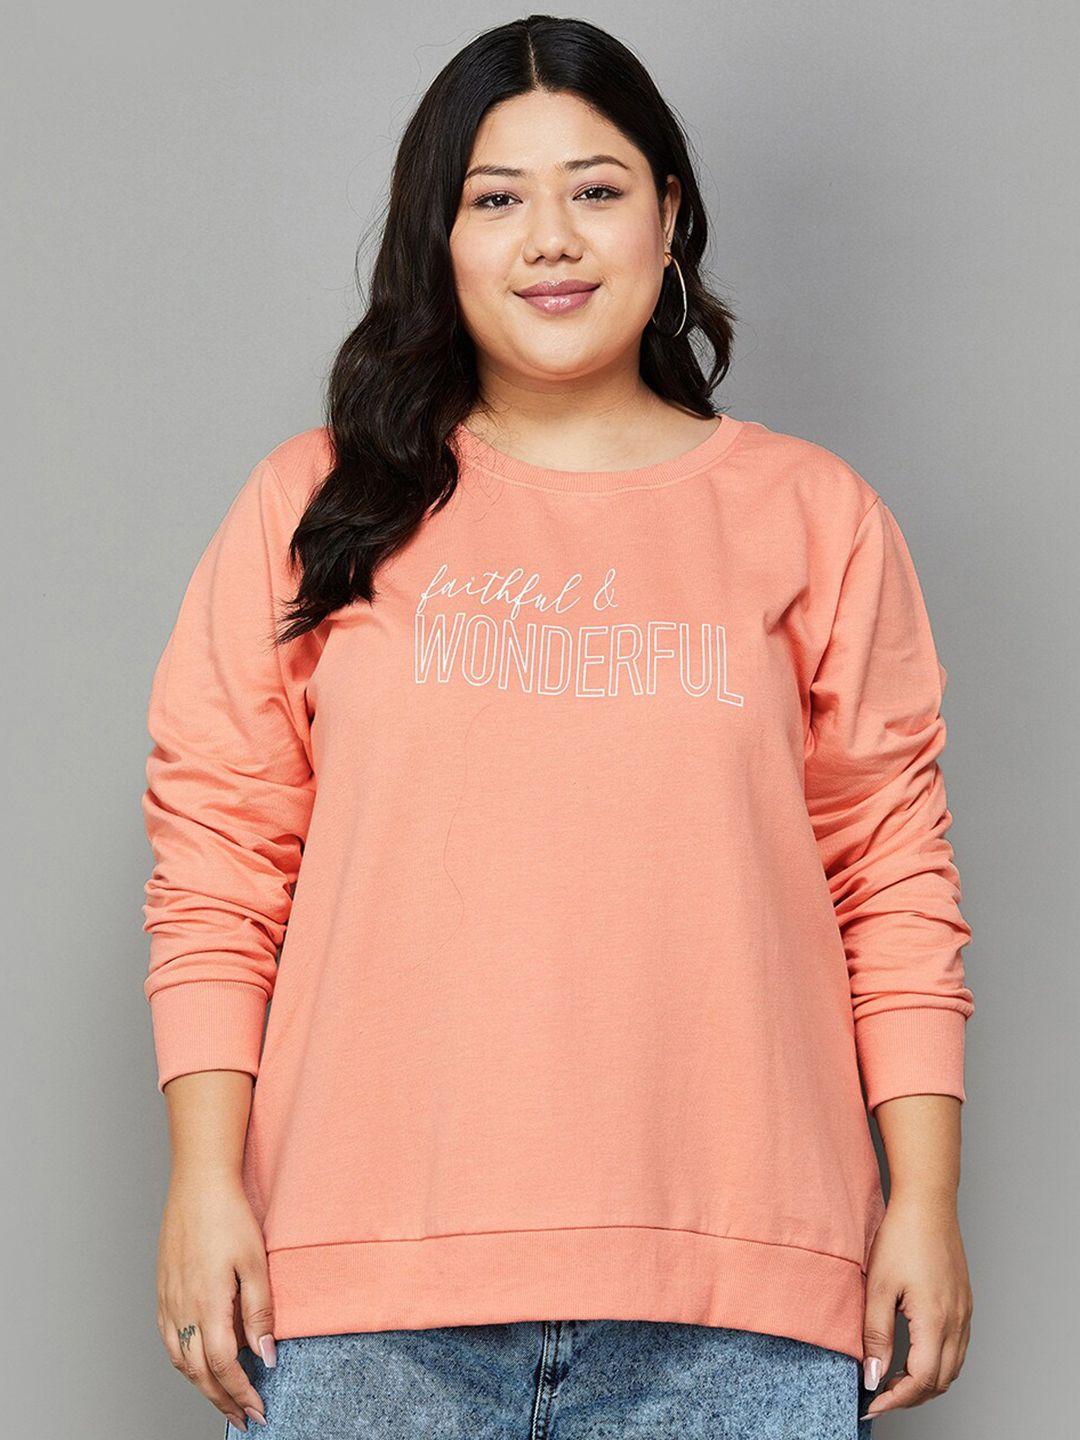 nexus by lifestyle plus size typography printed cotton pullover